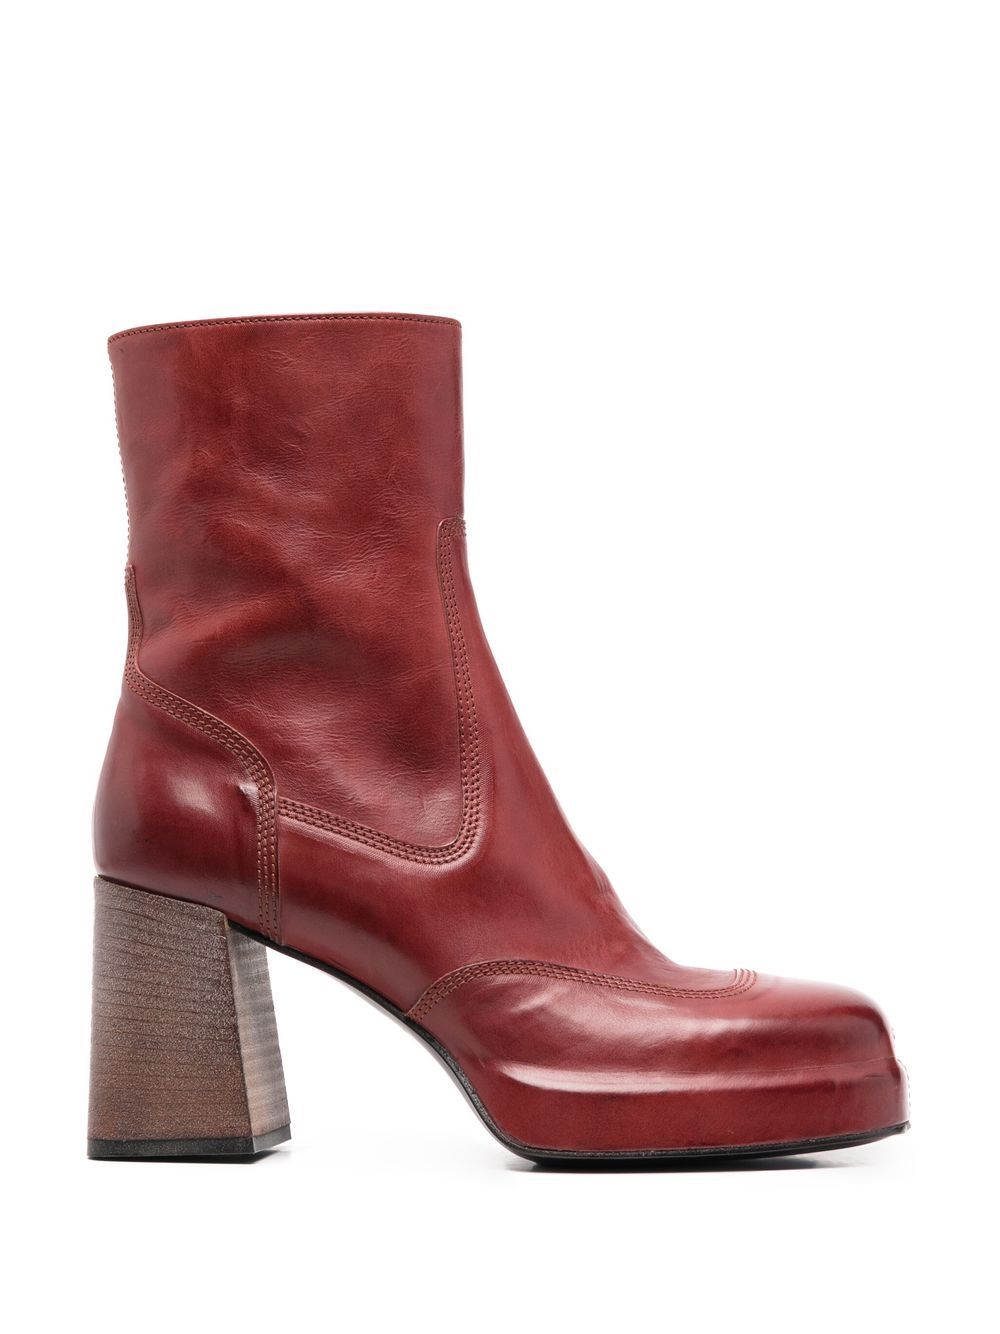 Moma 90mm leather boots - Red von Moma